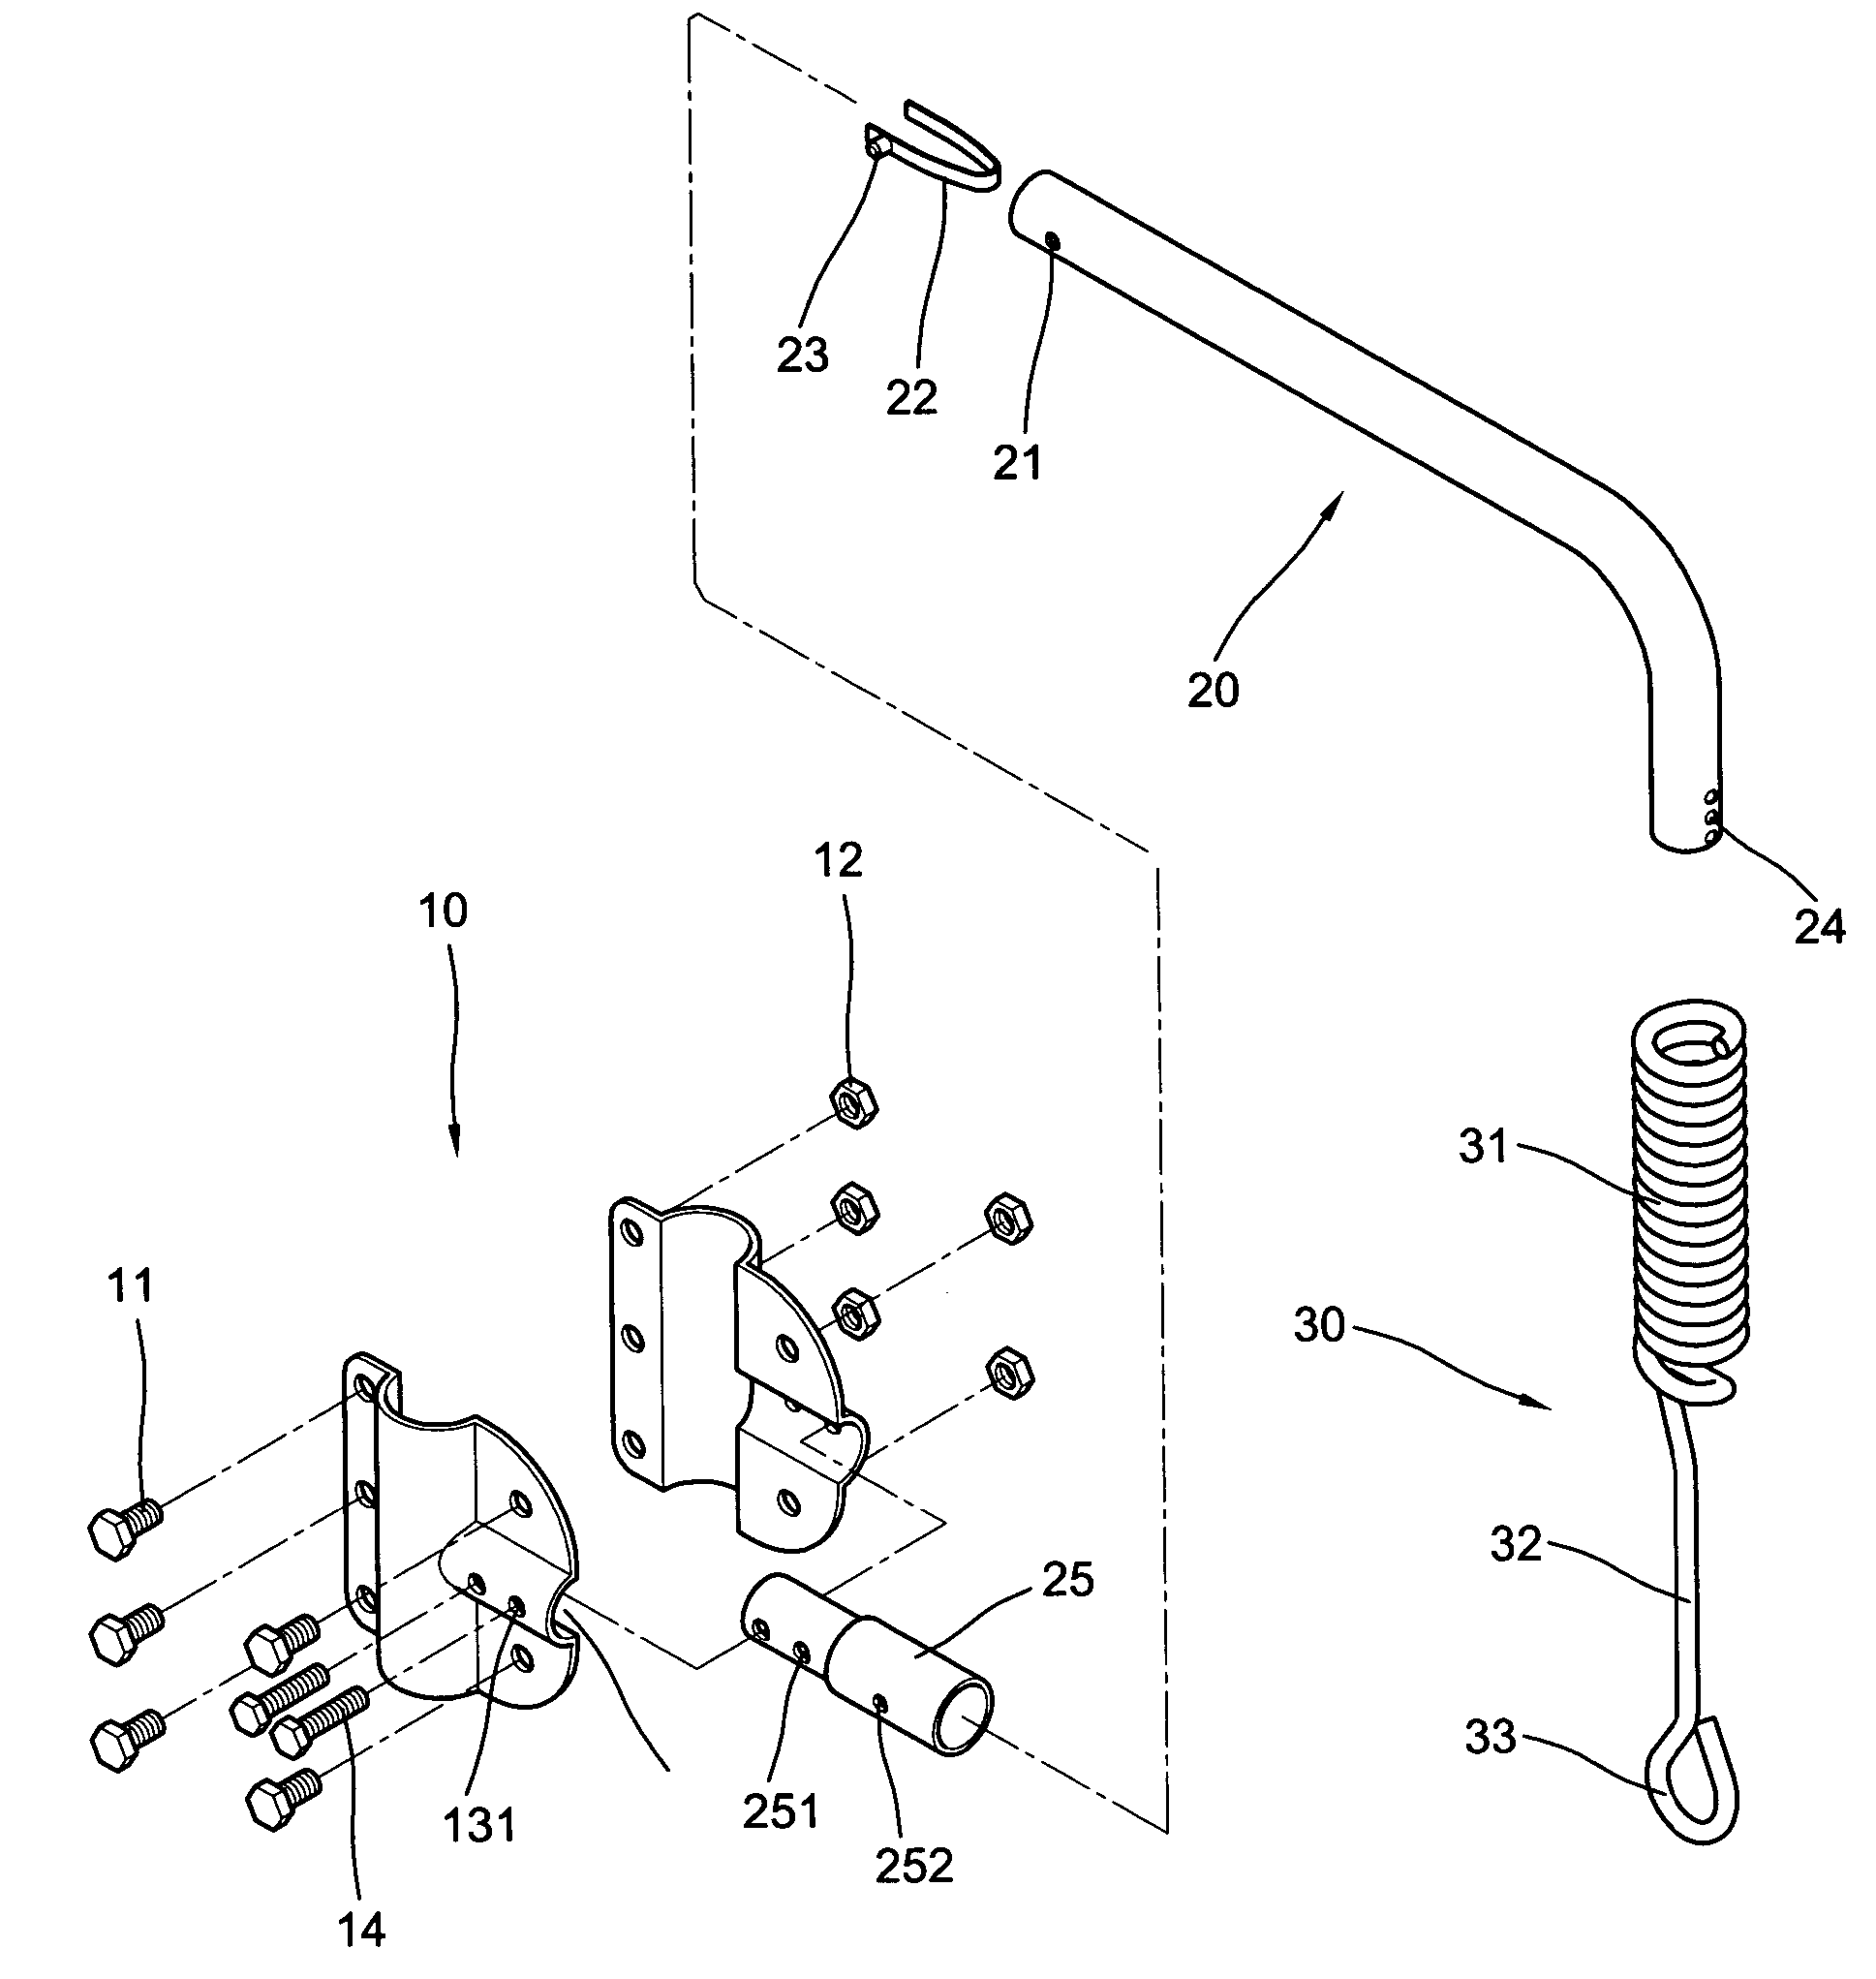 Device attached on bicycles for walking dogs